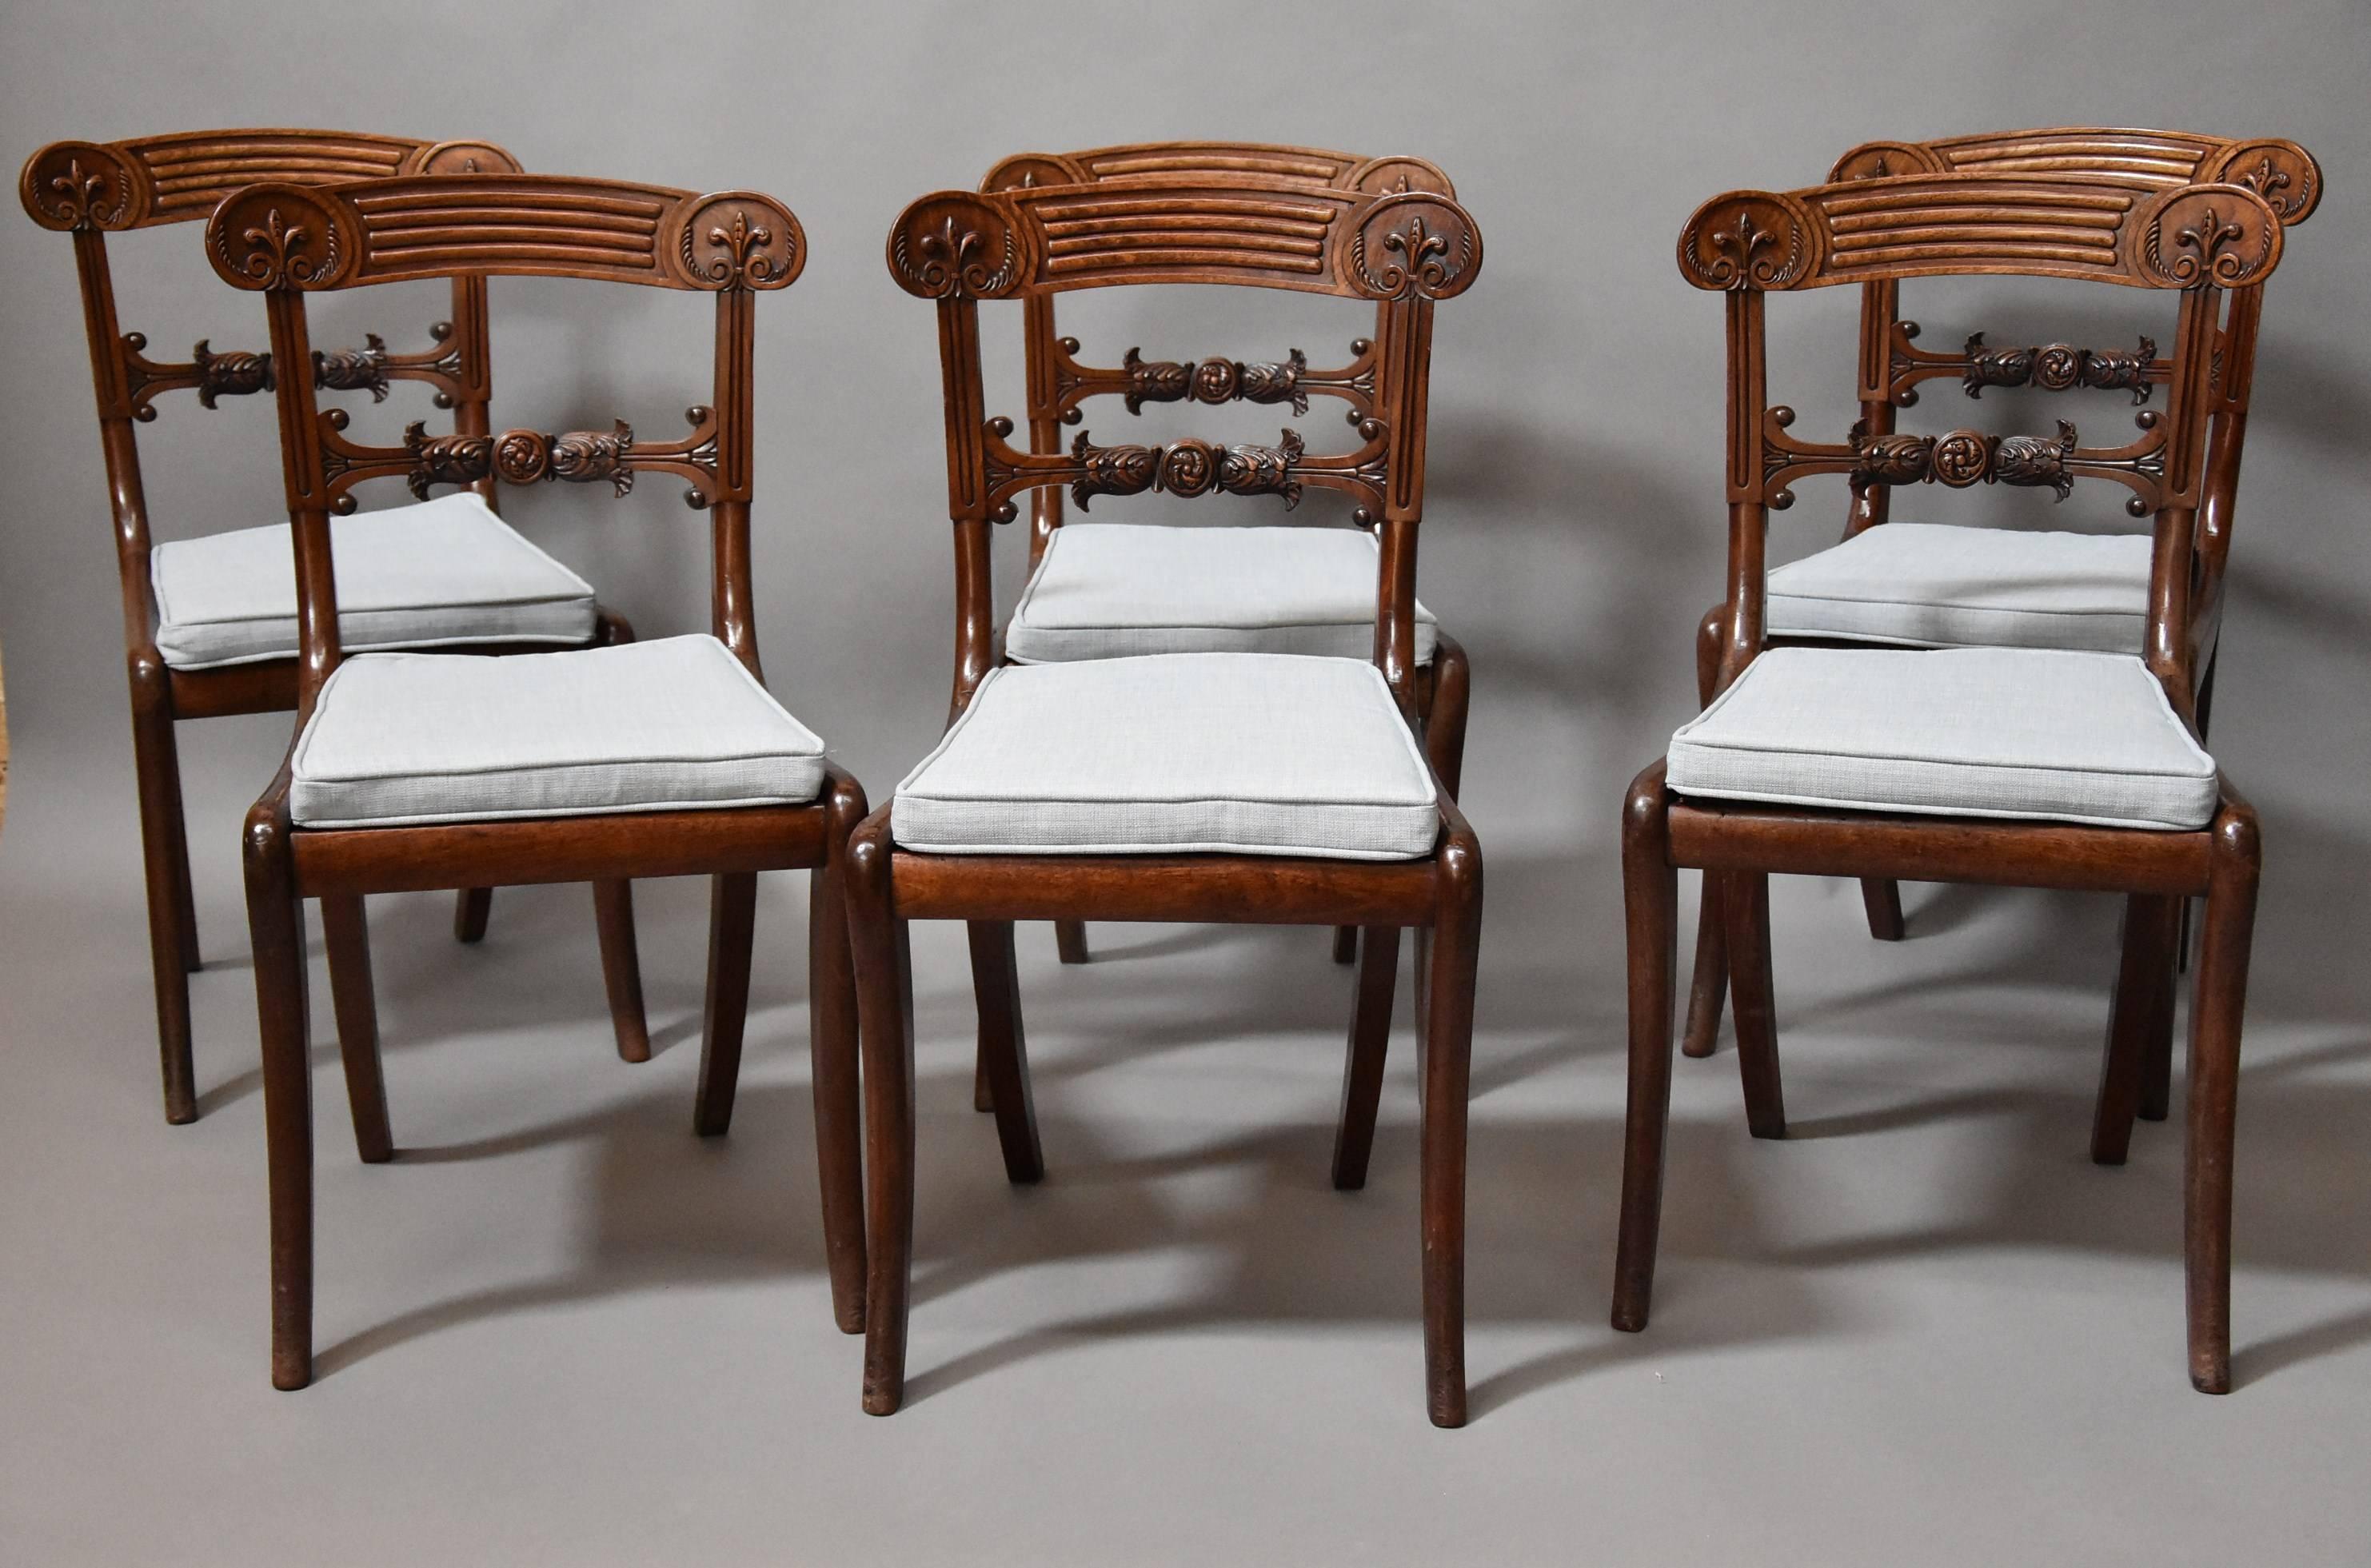 A superb set of eight Regency mahogany dining chairs in exceptional original condition and of superb patina (color). 

This set of chairs consists of two armchairs and six single chairs which form a good set of eight dining chairs.

The chairs